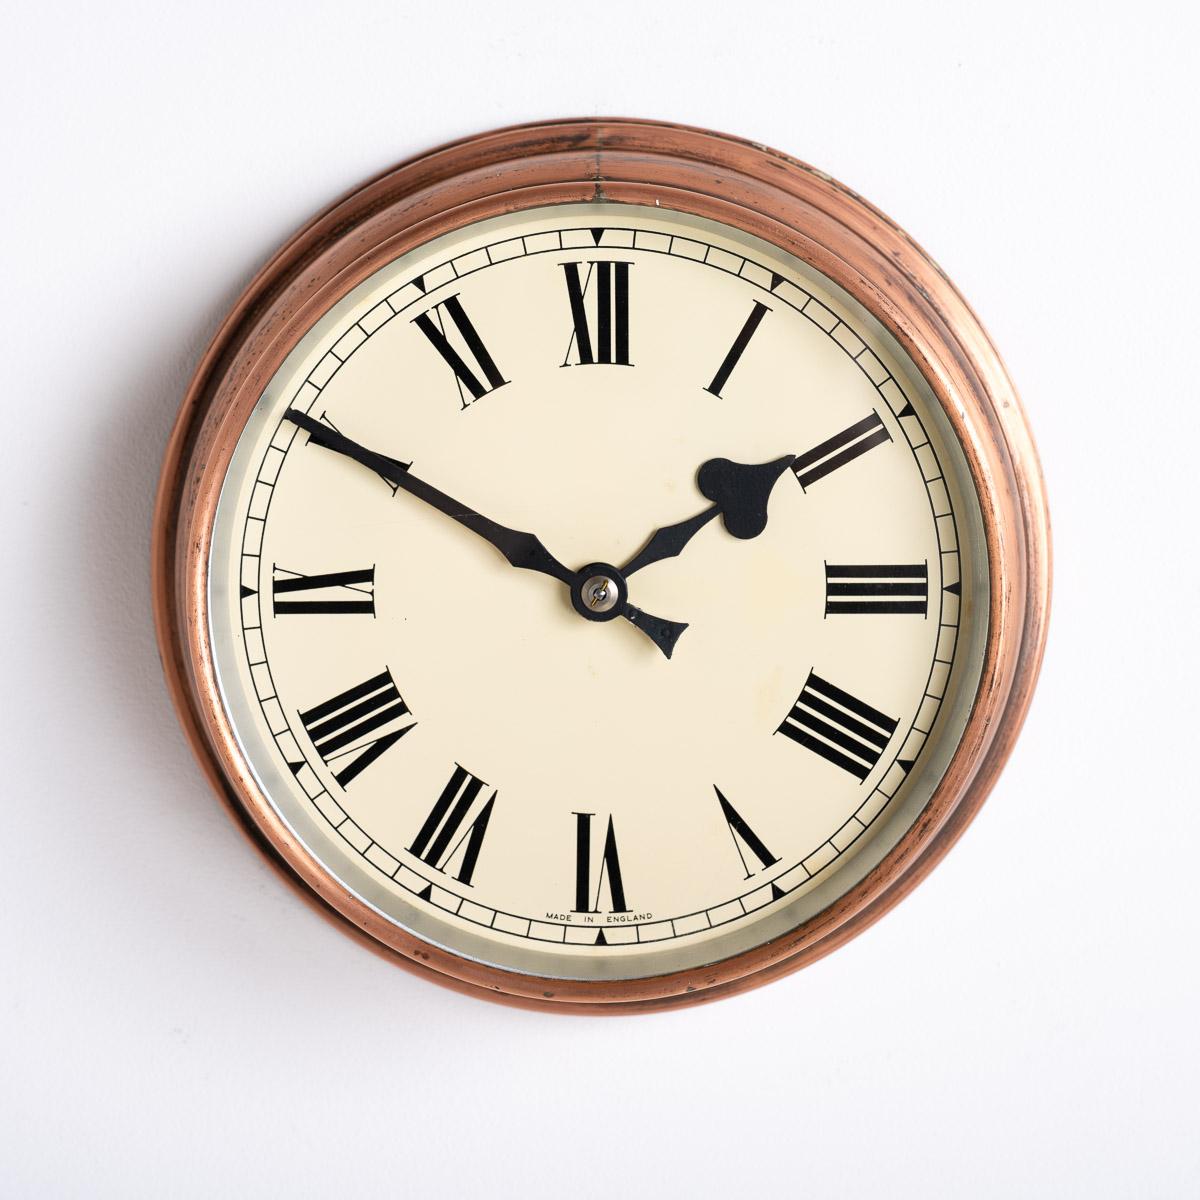 Reclaimed Industrial Aged Spun Copper Case Wall Clock By Synchronome 2